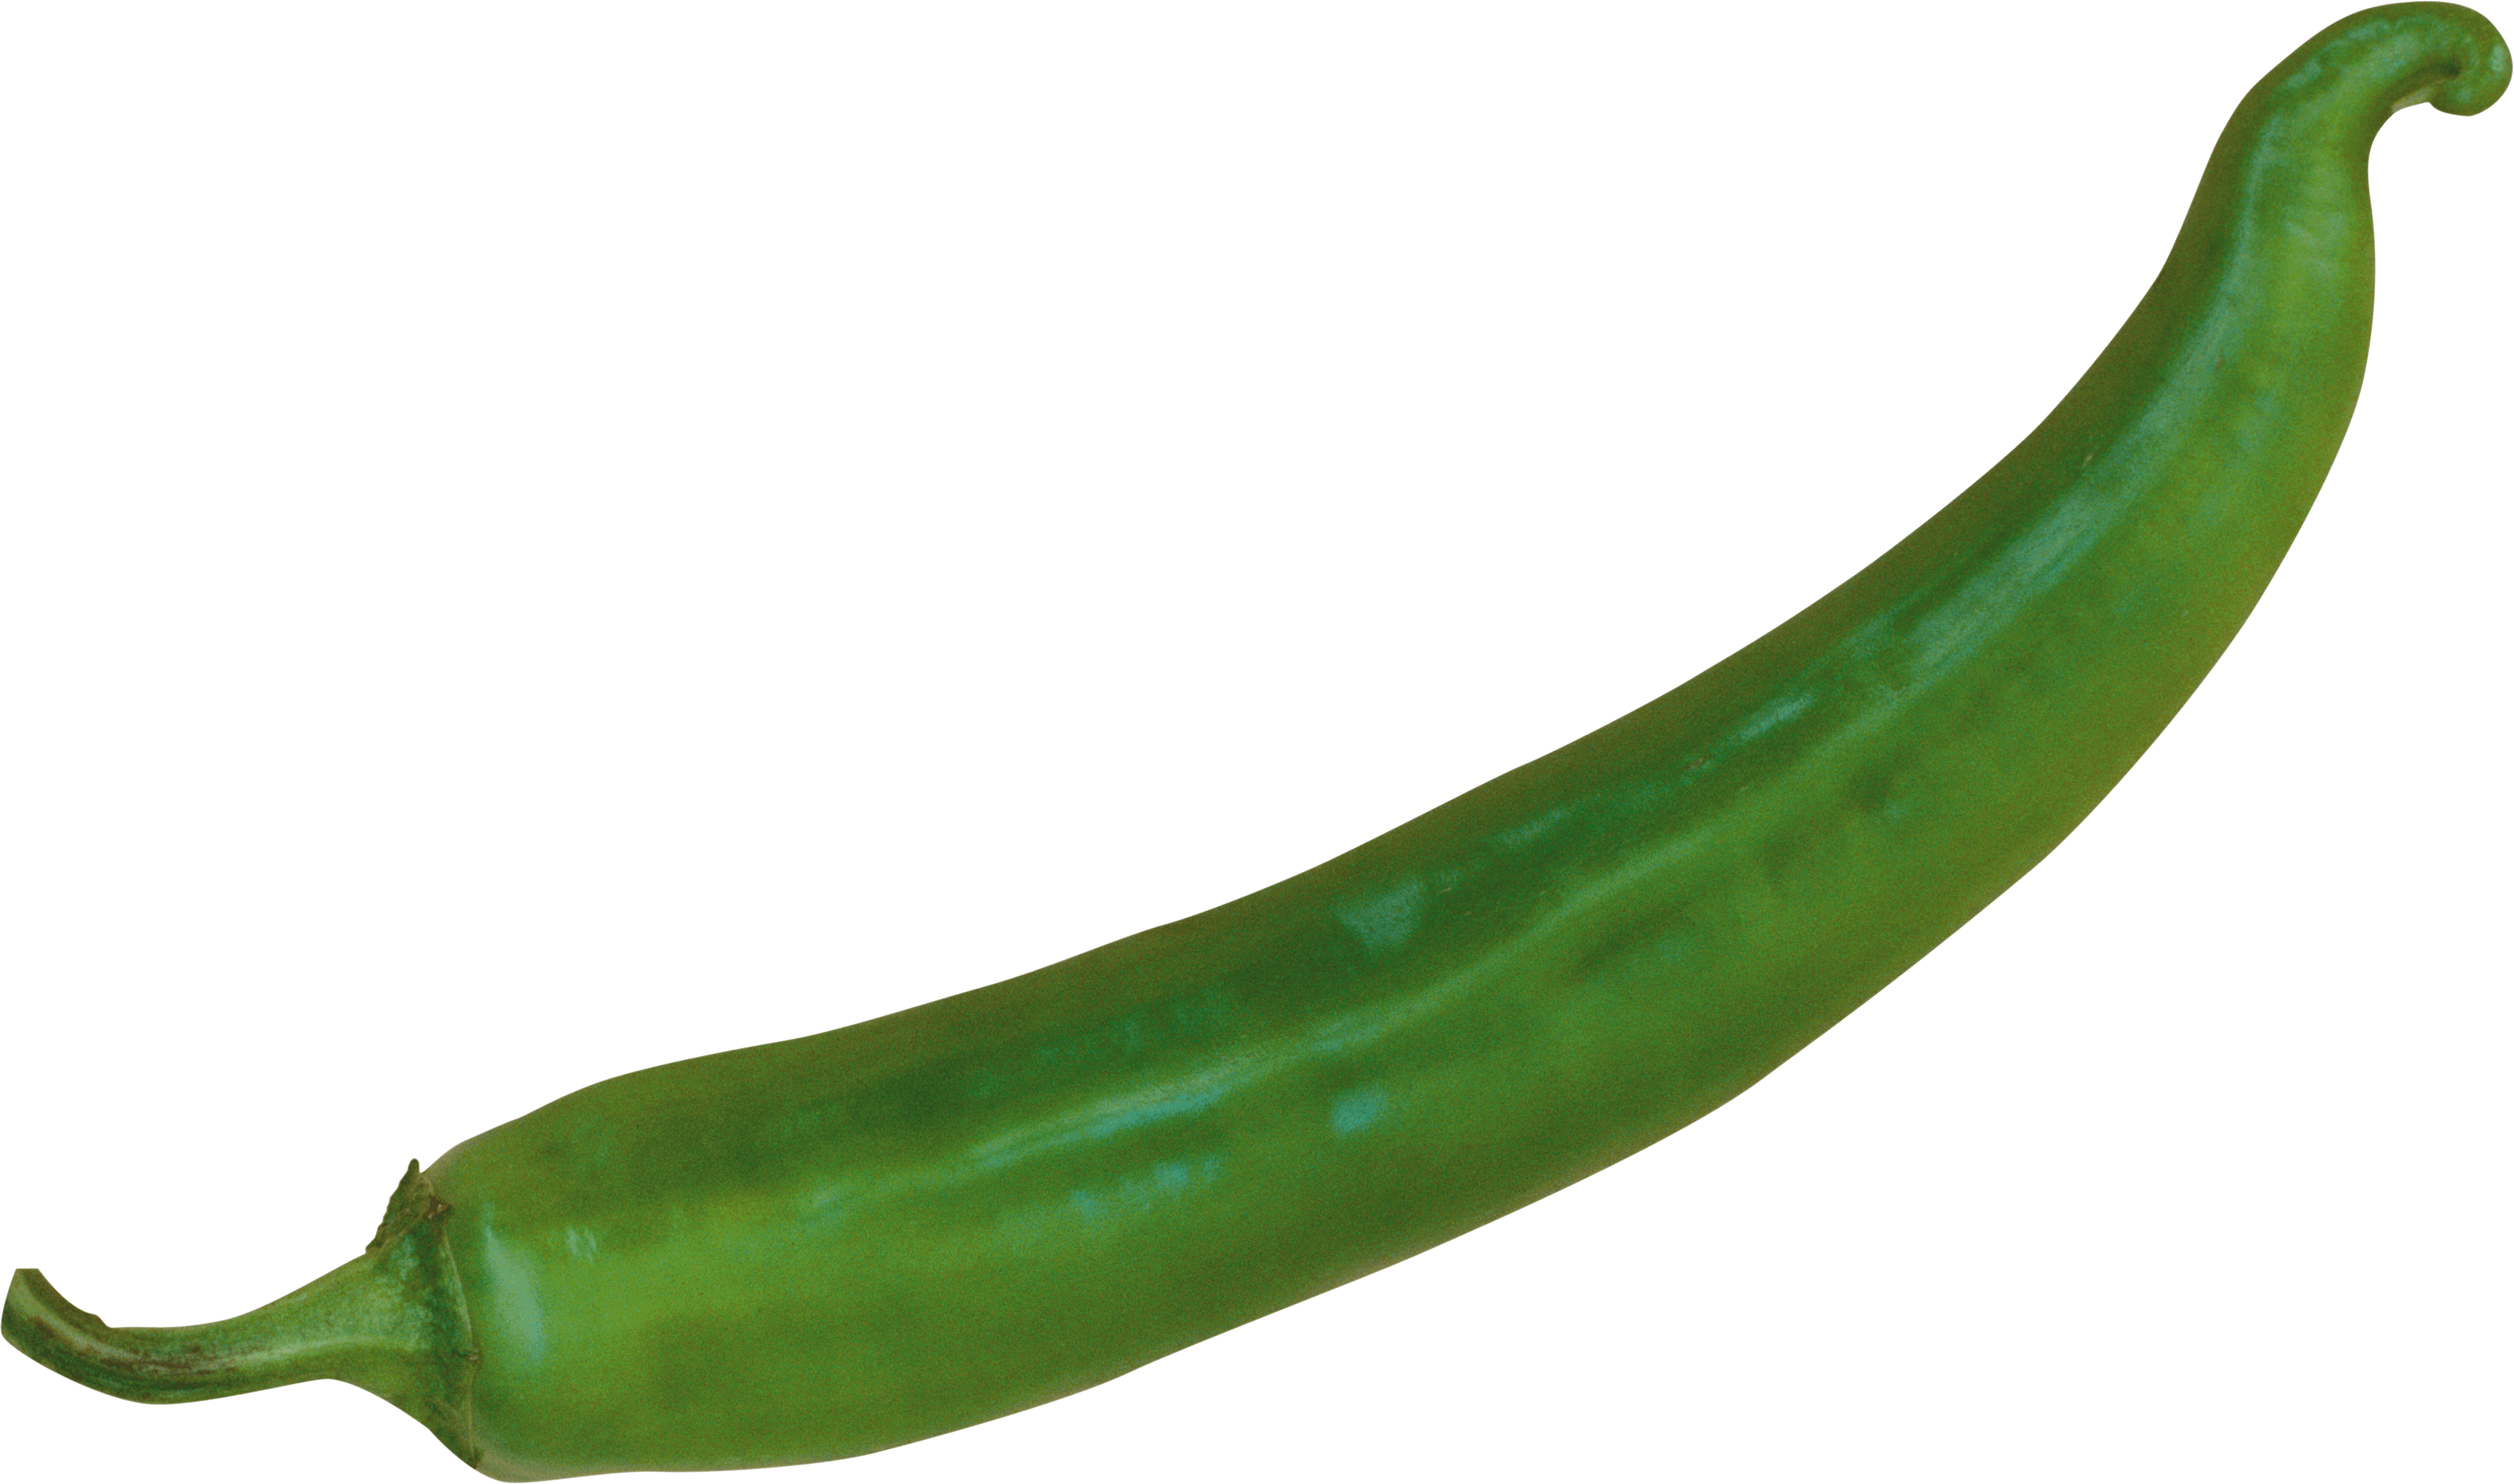 Chili Green Pepper Free Transparent Image HD PNG Image